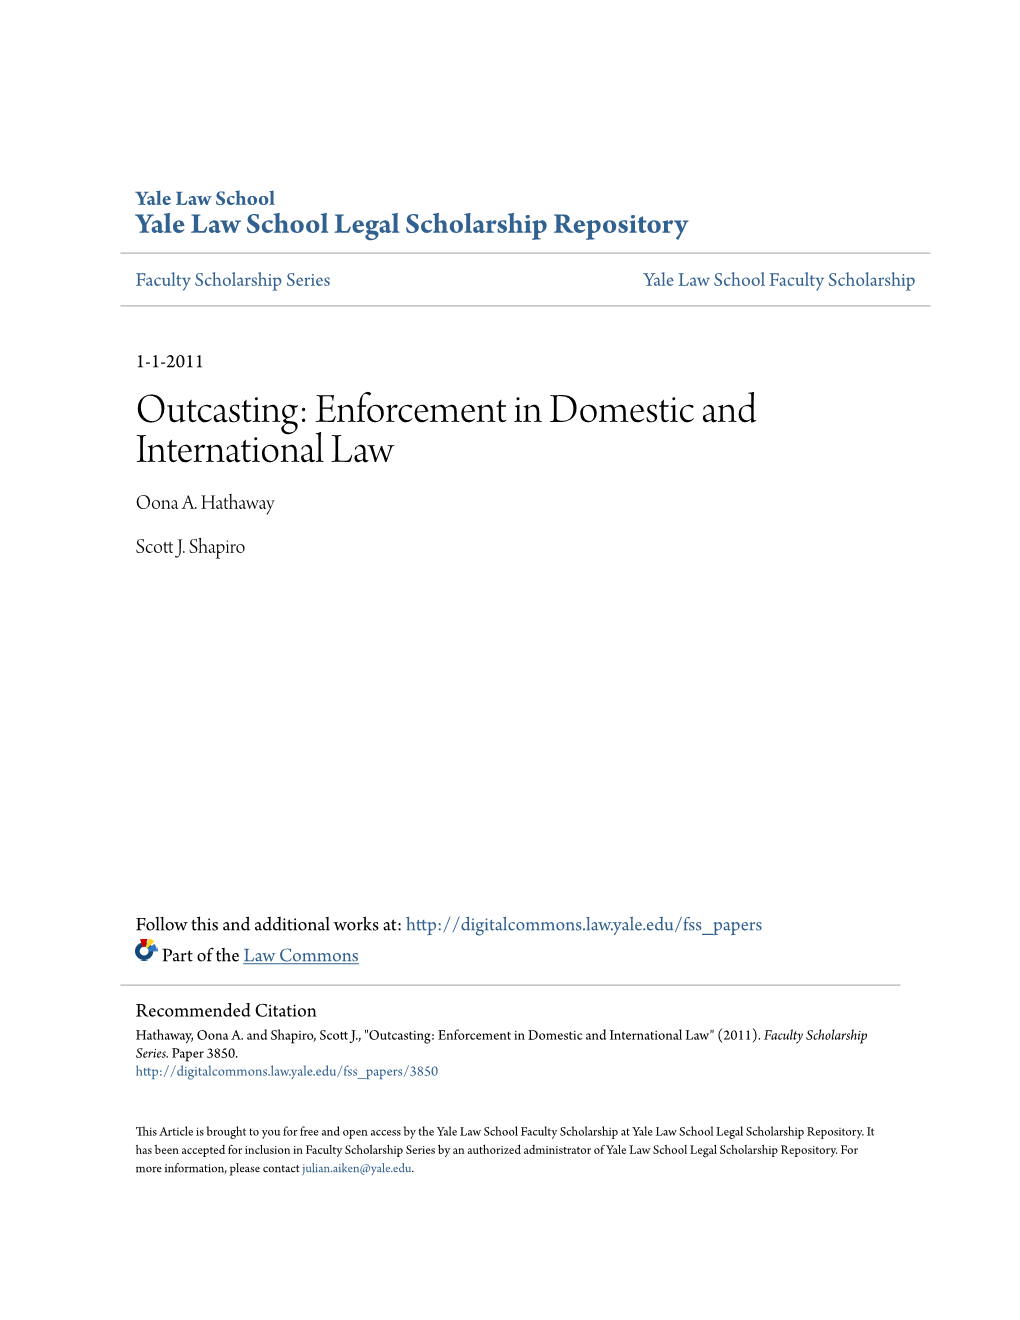 Enforcement in Domestic and International Law Oona A